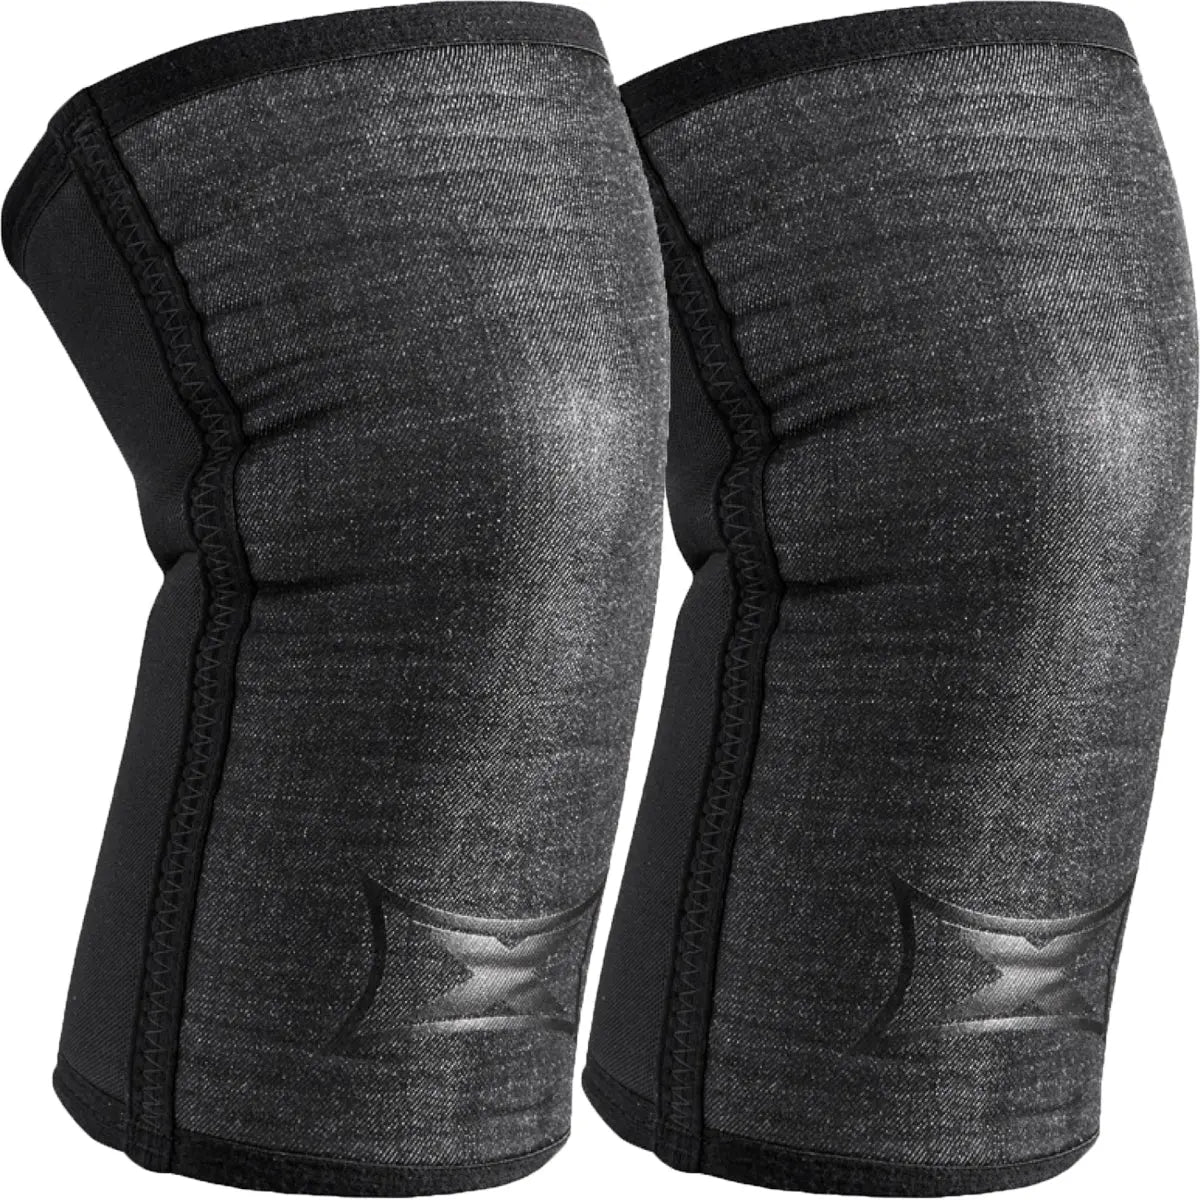 Sling Shot Extreme "X" Knee Sleeves by Mark Bell Sling Shot